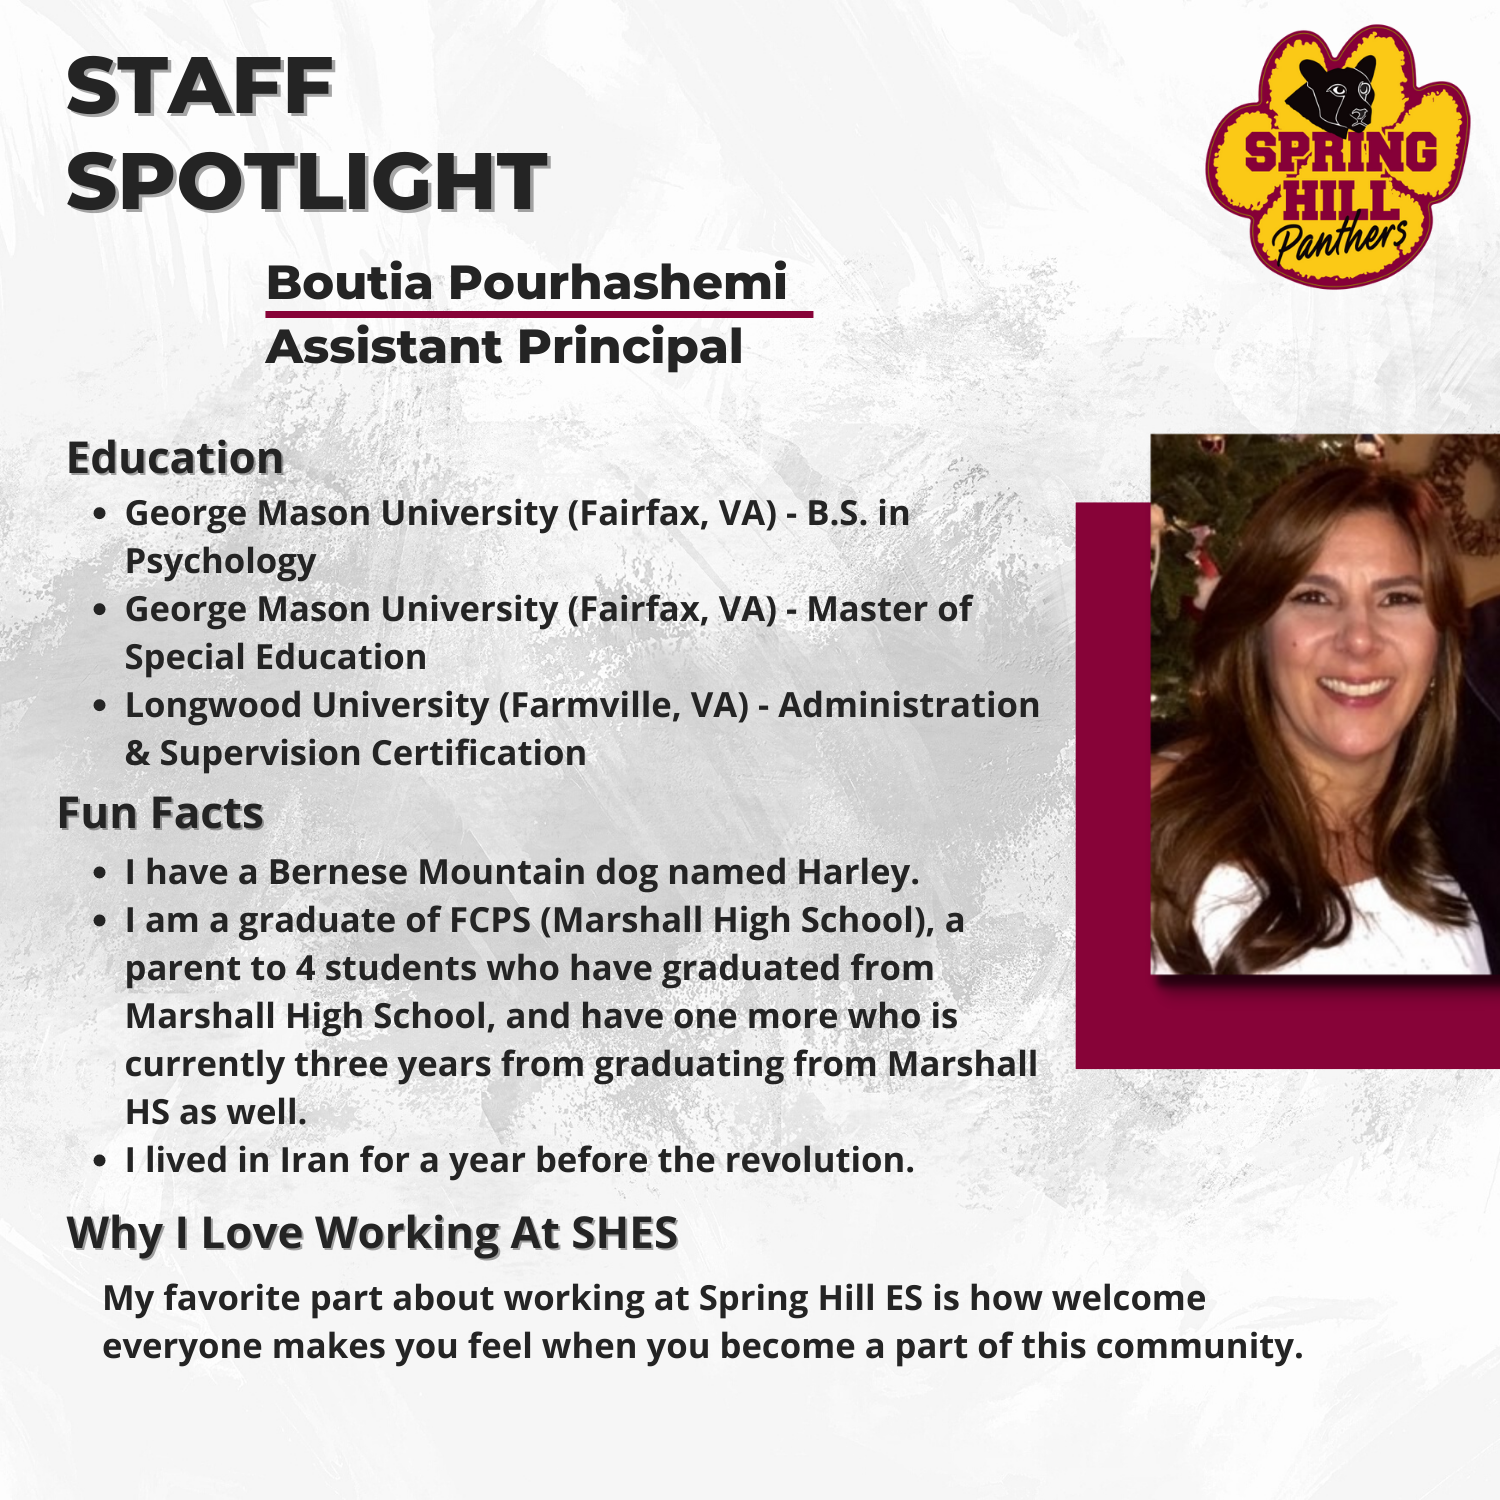 Boutia Pourhashemi Assistant Principal George Mason University (Fairfax, VA) - B.S. in Psychology, George Mason University (Fairfax, VA) - Masters of Special Education, & Longwood University (Farmville, VA) - Administration & Supervision Certification -I have a Bernese Mountain dog named Harley. -I am a graduate of FCPS (Marshall High School), a parent to 4 students who have graduated from Marshall High School, and have one more who is currently three years from graduating from Marshall HS as well. -I lived in Iran for a year before the revolution. My favorite part about working at Spring Hill ES is how welcome everyone makes you feel when you become a part of this community.